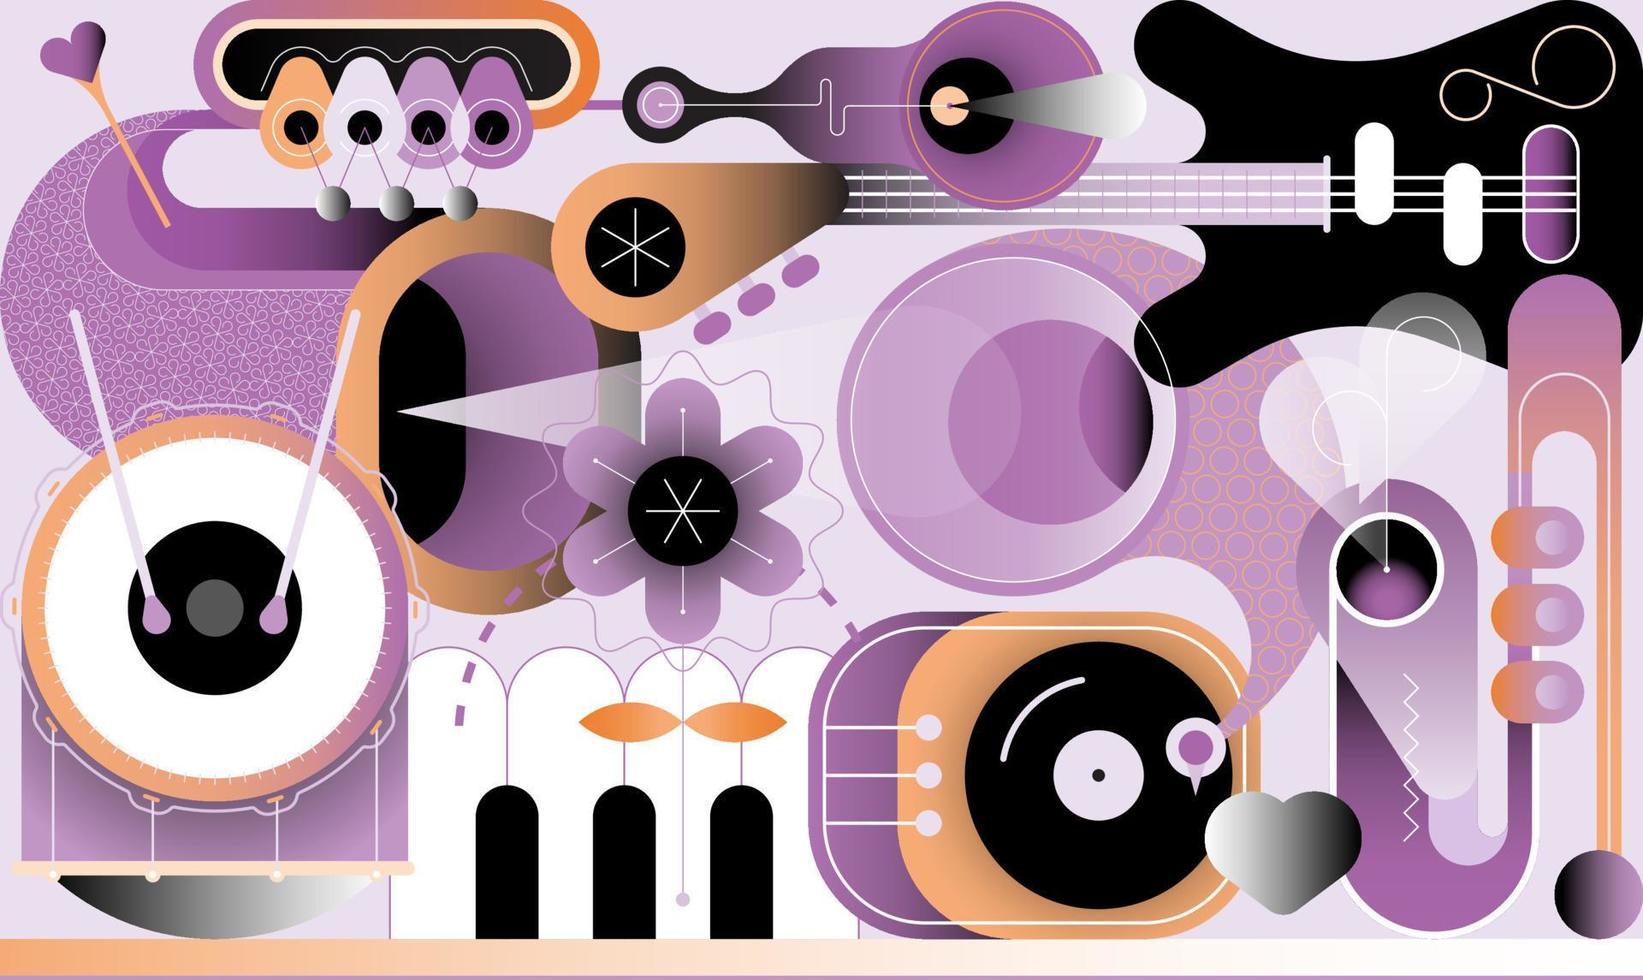 Abstract Music Design vector